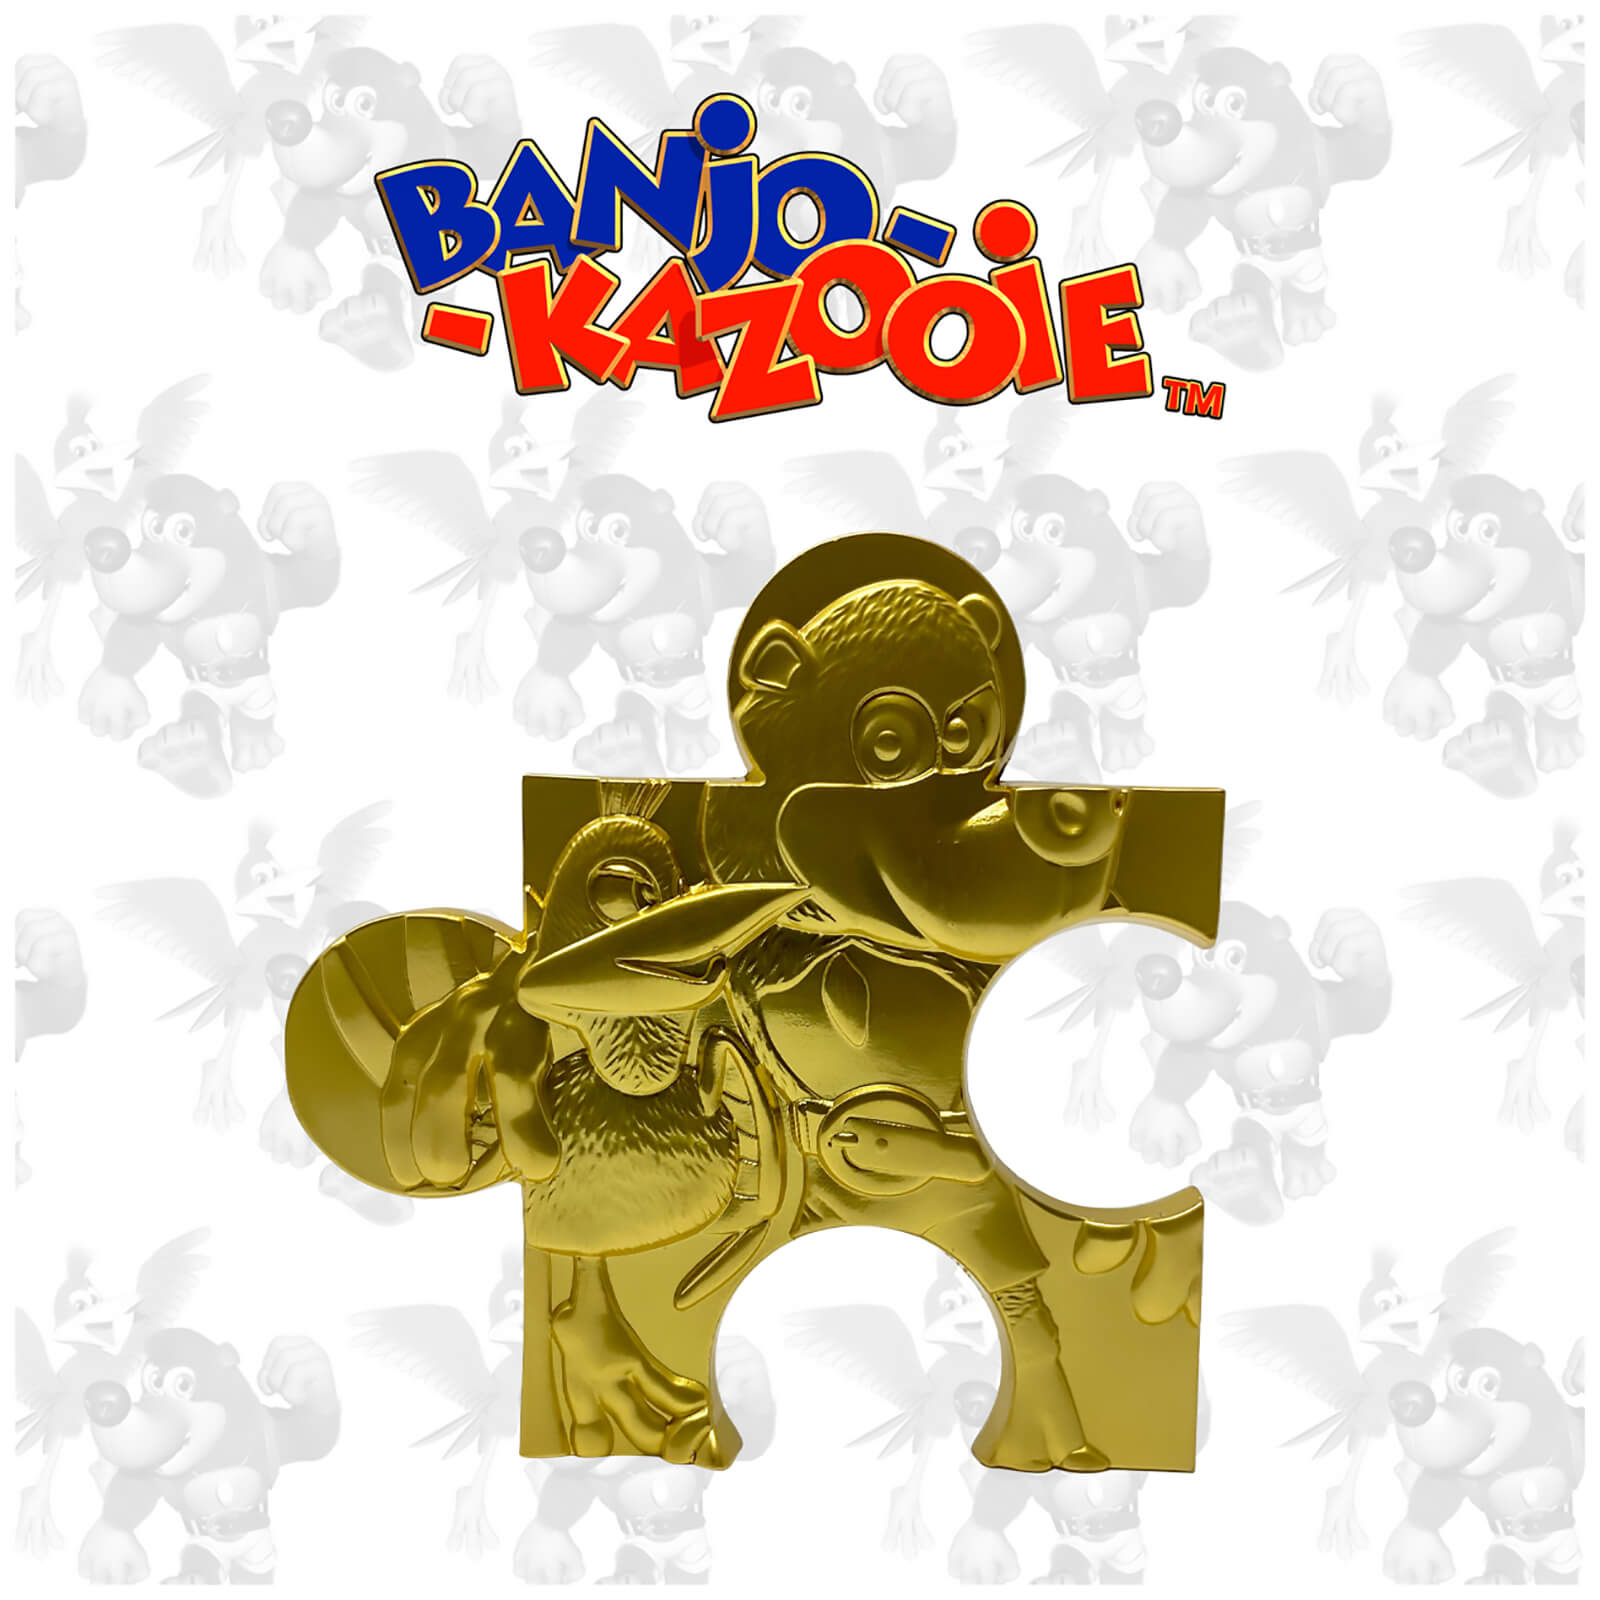 Image of Banjo Kazooie Limited Edition 24K Gold plated Jigsaw Piece - Jiggy (Rare Store)